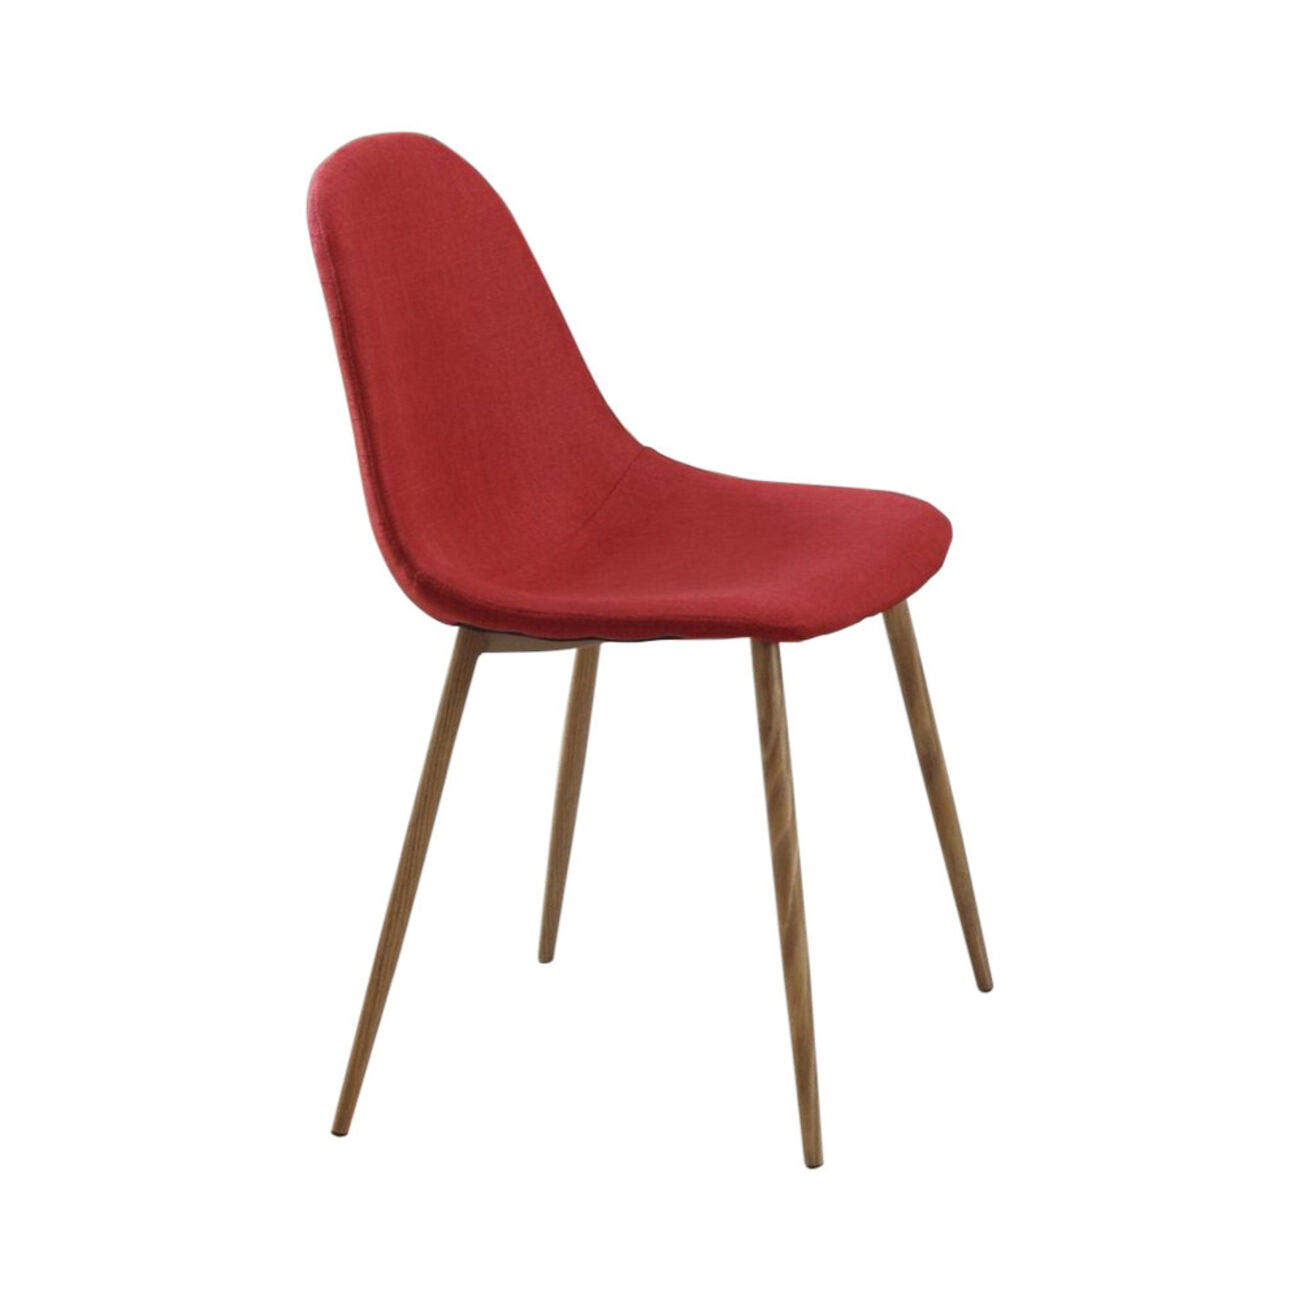 Metal Frame Dining Chair With Petal-Like Seats  Set Of 4 Red And Brown